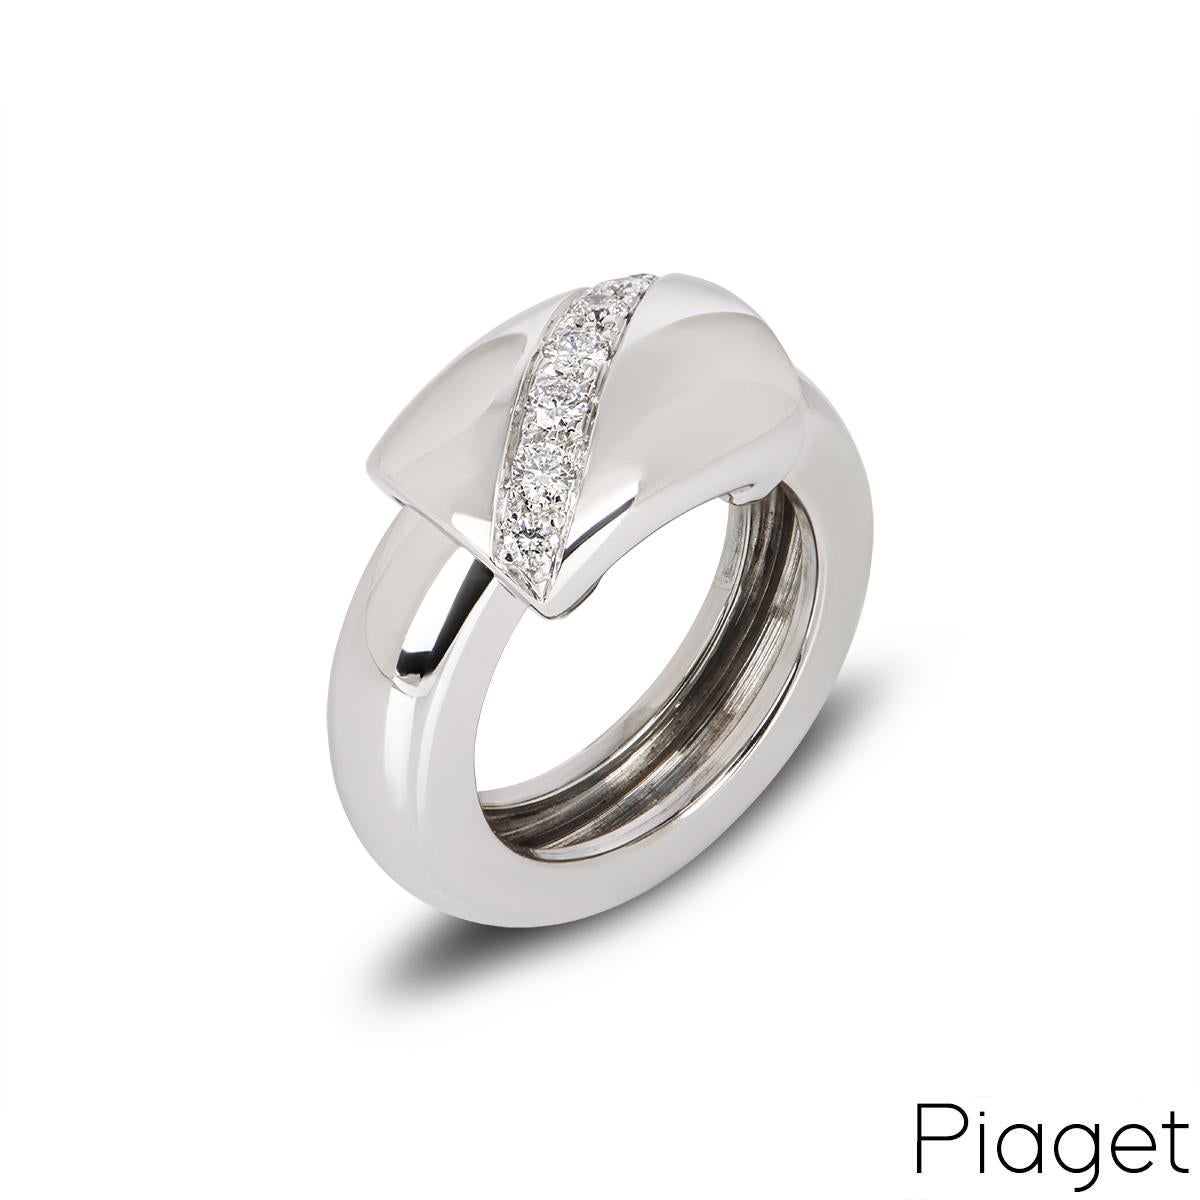 A unique 18k white gold diamond ring by Piaget from the Dancer collection. The ring features a free moving centre with seven round brilliant cut diamonds set diagonally with an approximate weight of 0.30ct, F-G colour and VS-SI clarity. The ring